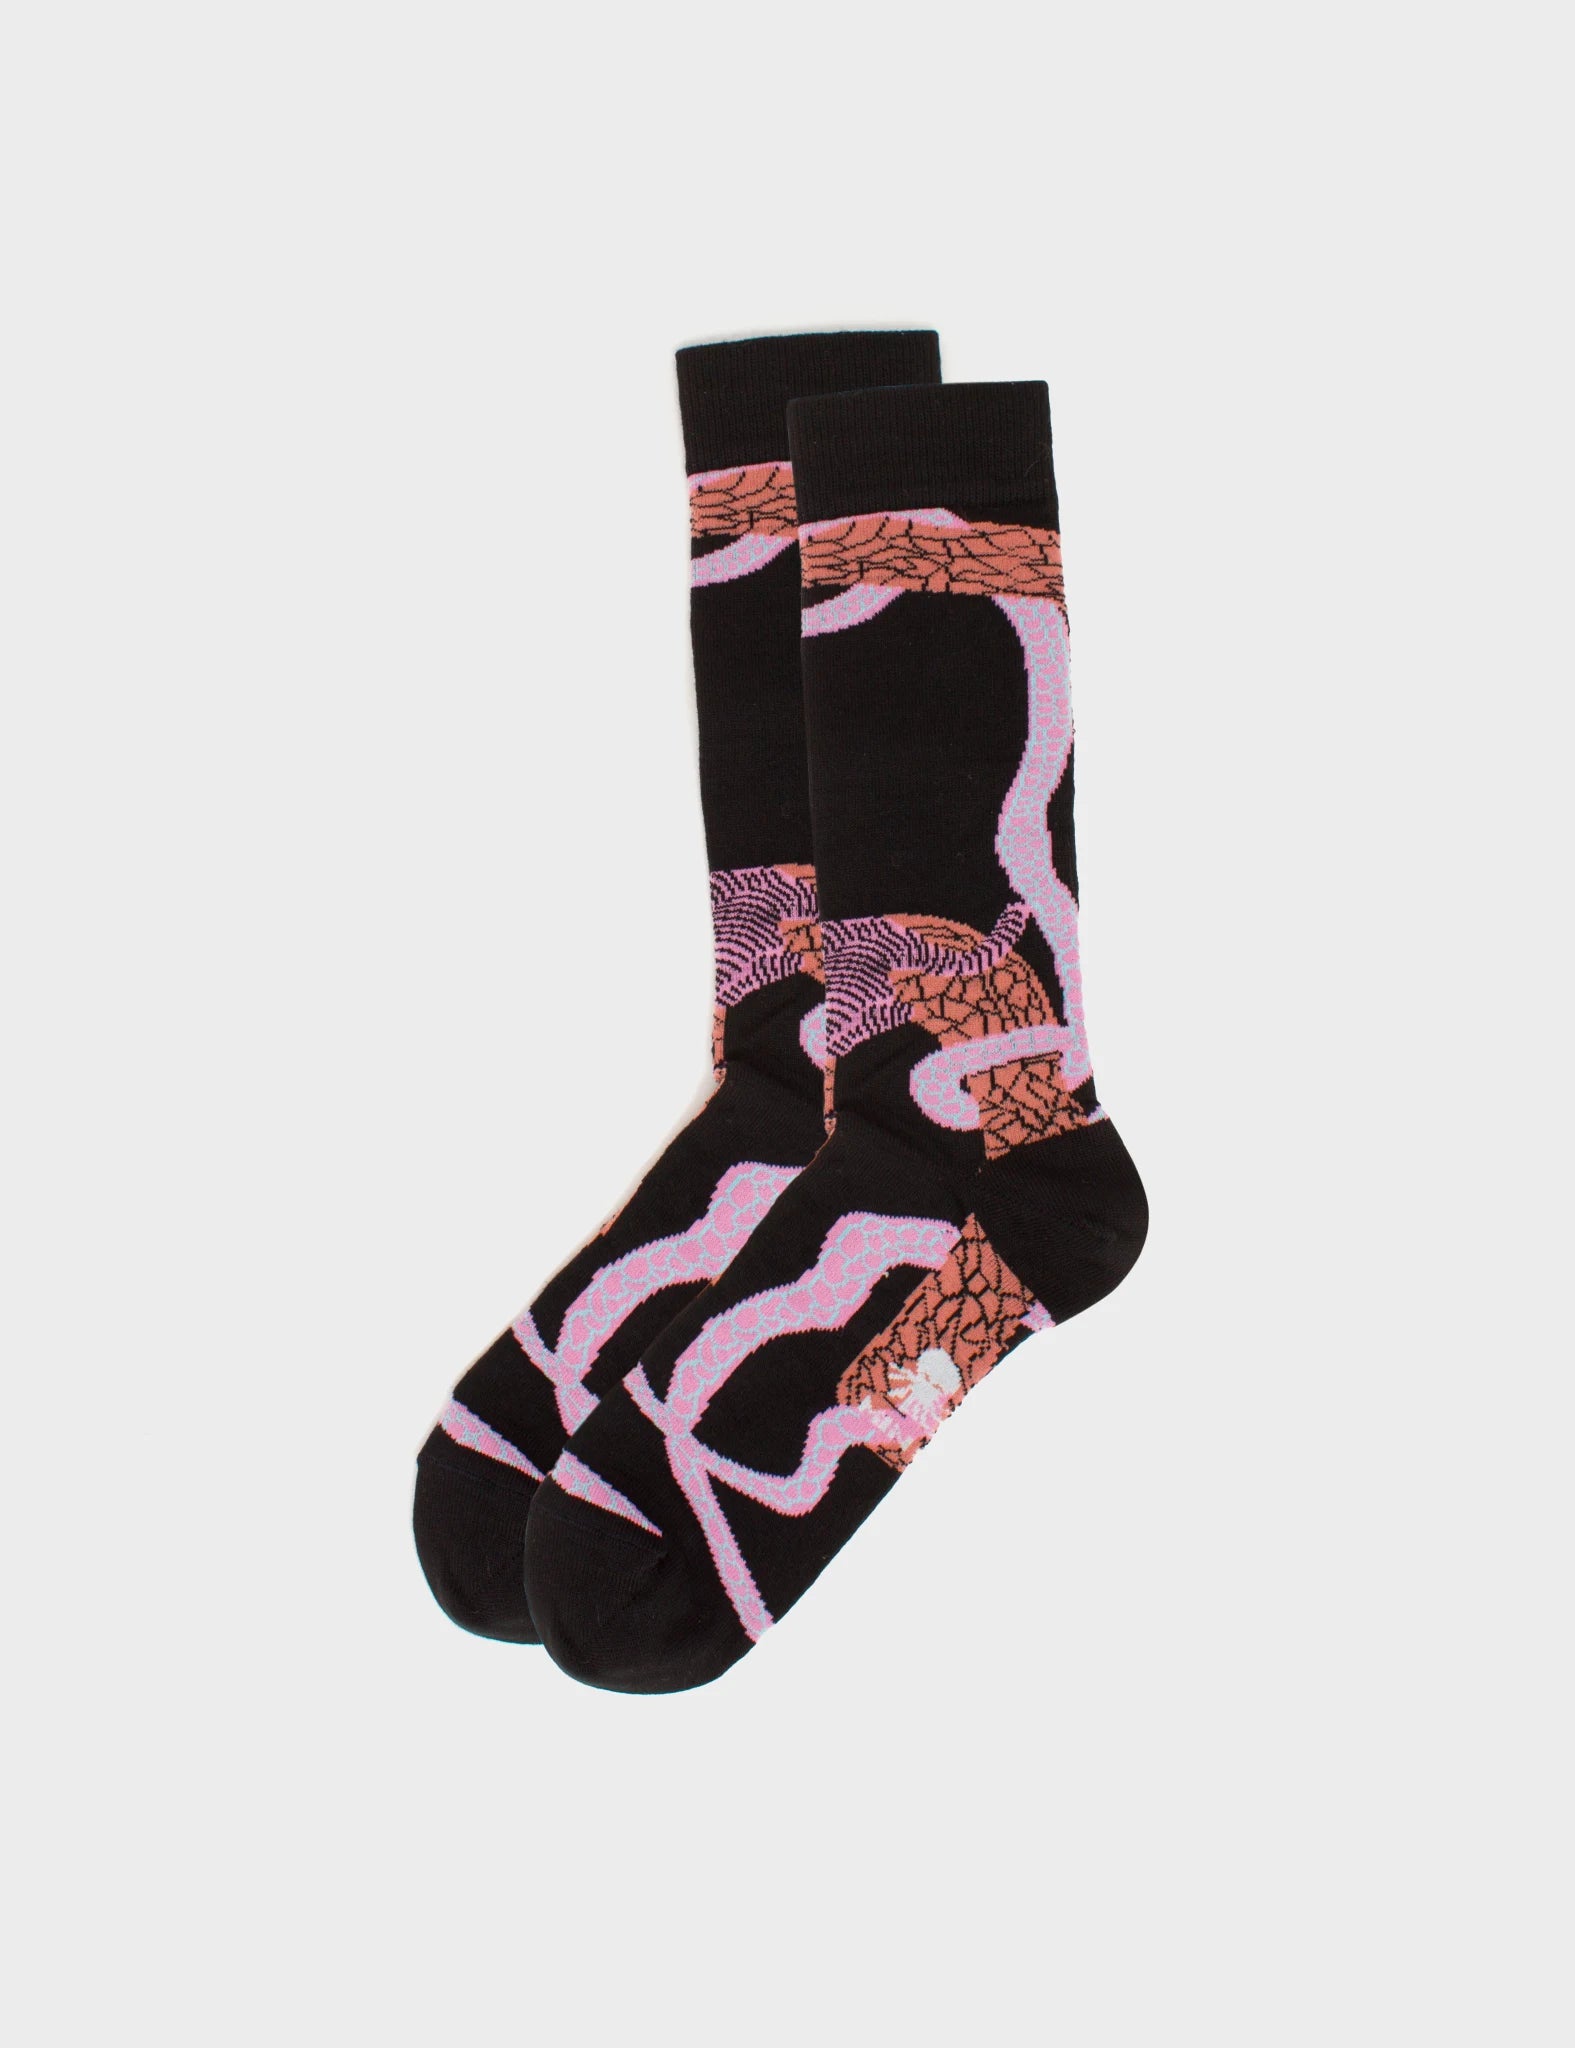 Black and Pink Socks - Tangle Tales - Side view